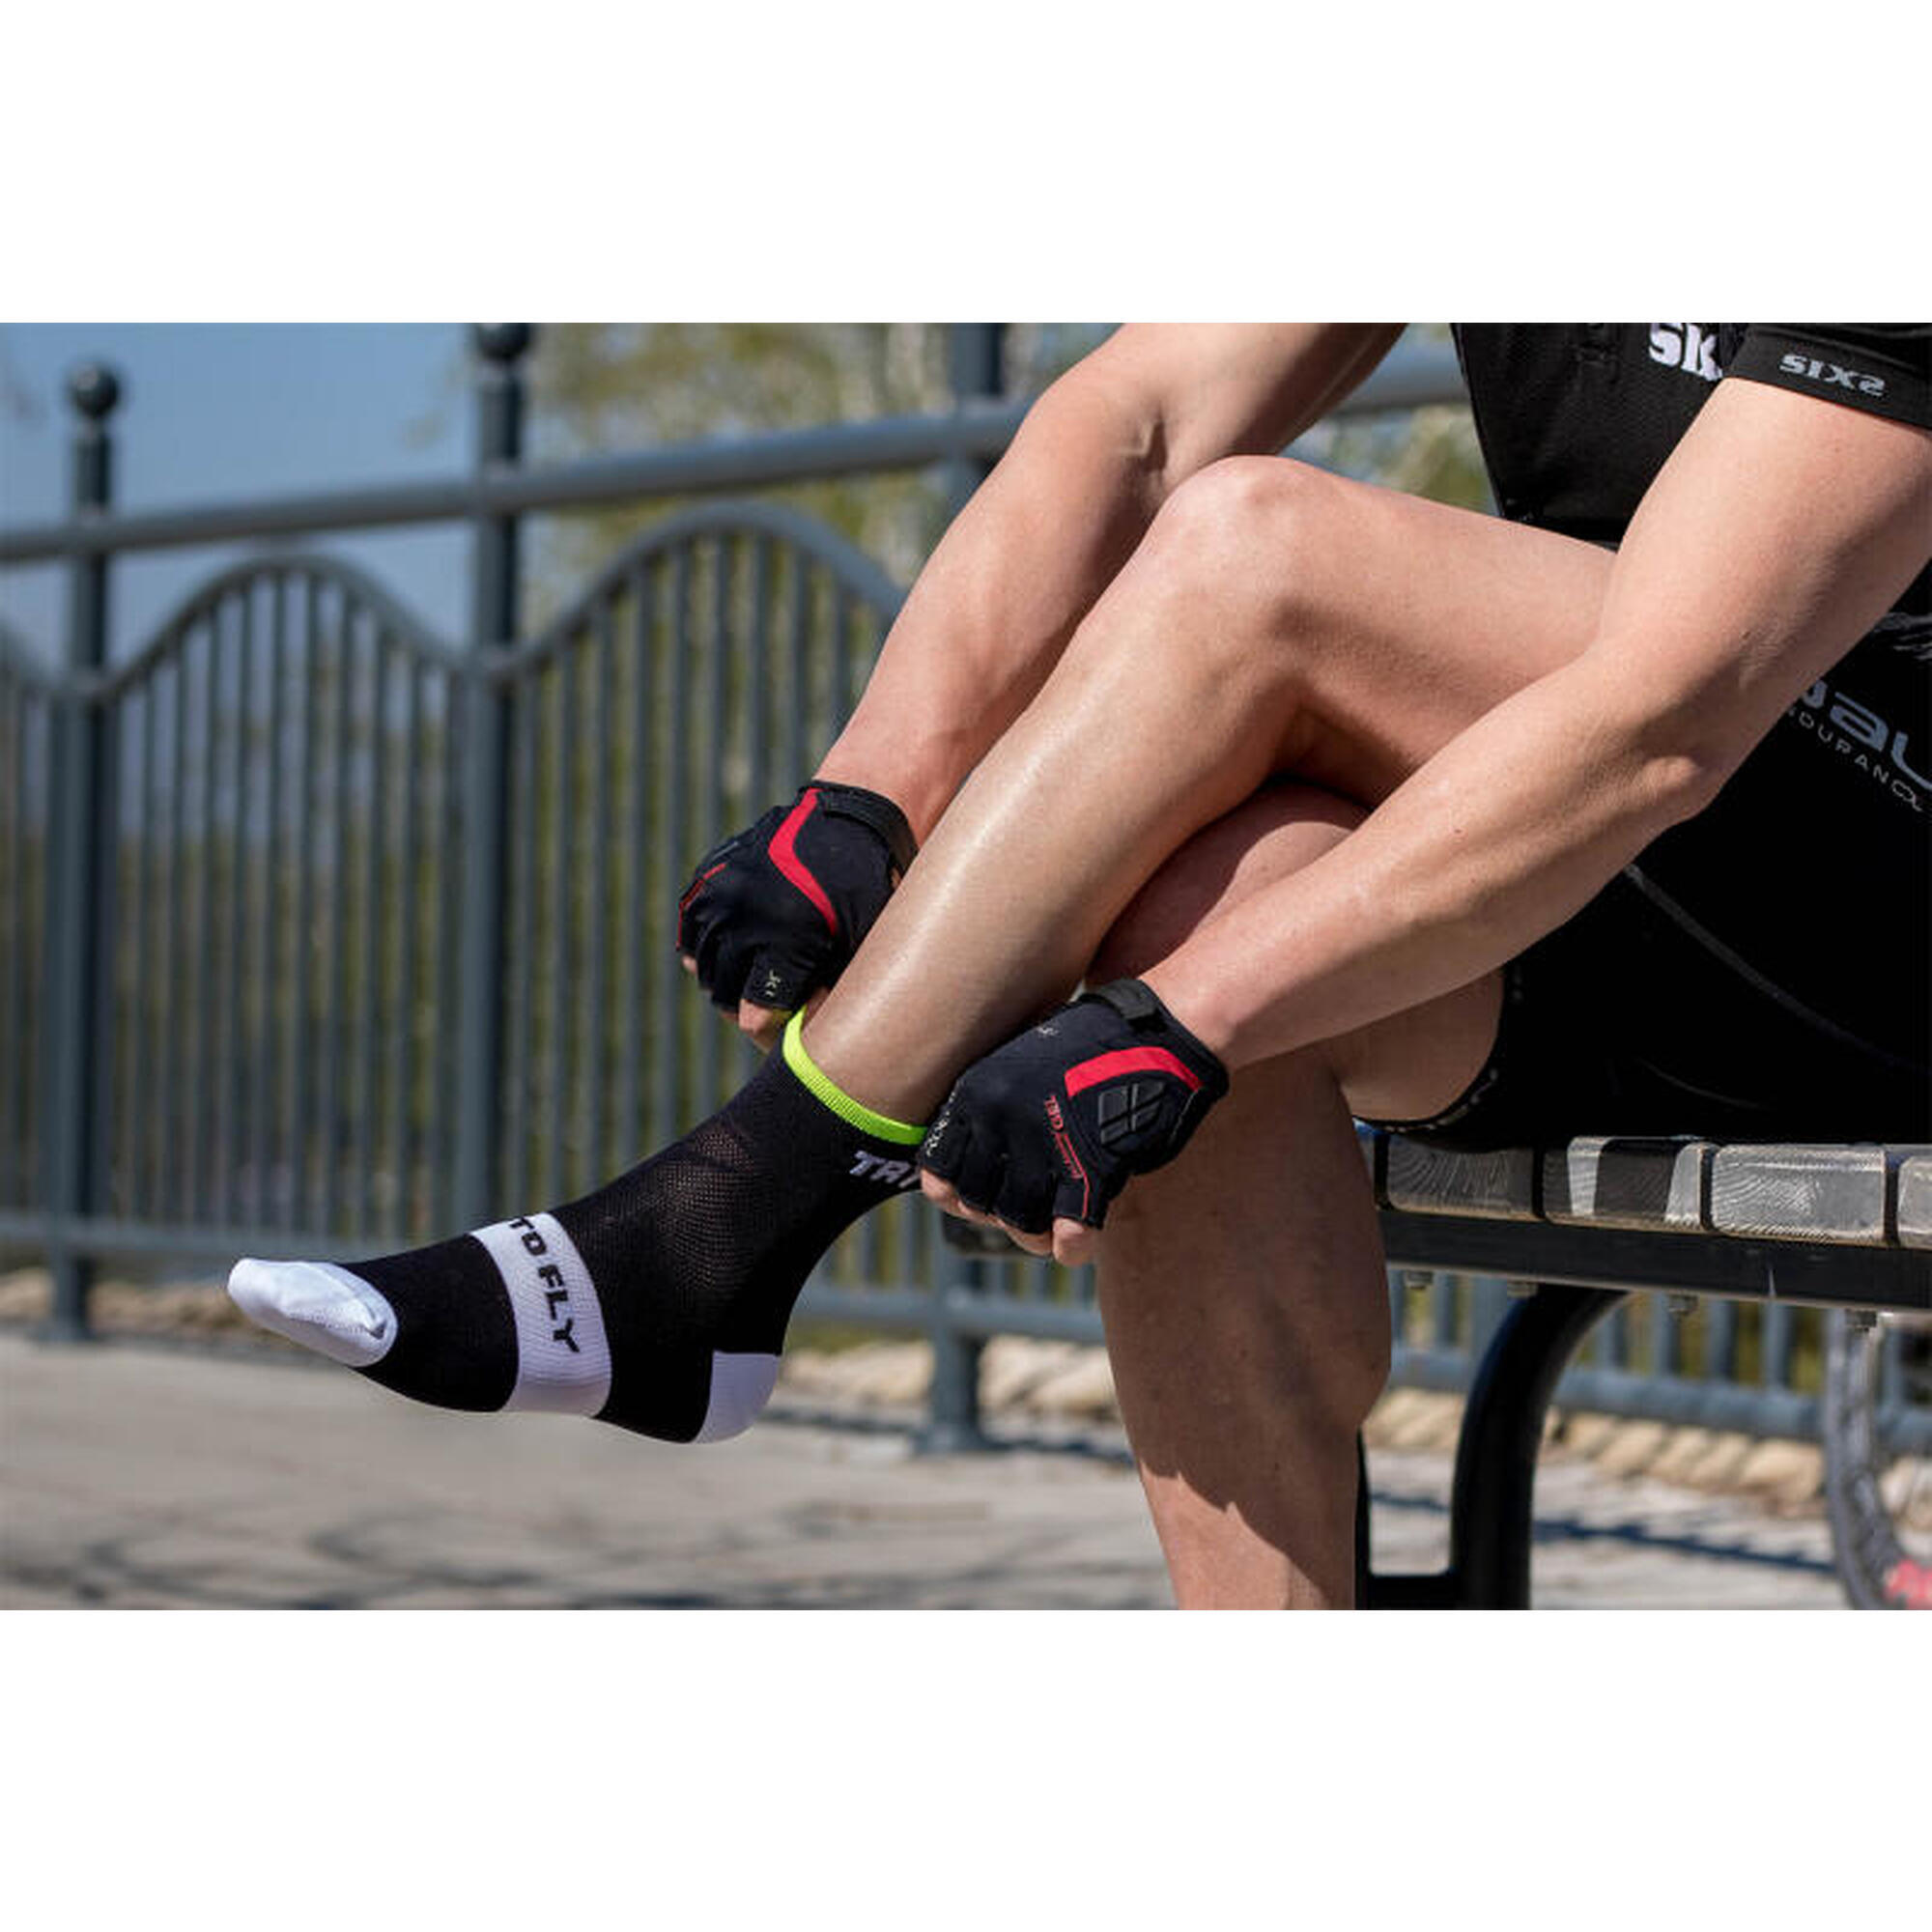 Sosete scurte ciclism CYCLING ANKLE SOCKS Meryl® Skinlife Black-White, 39-42